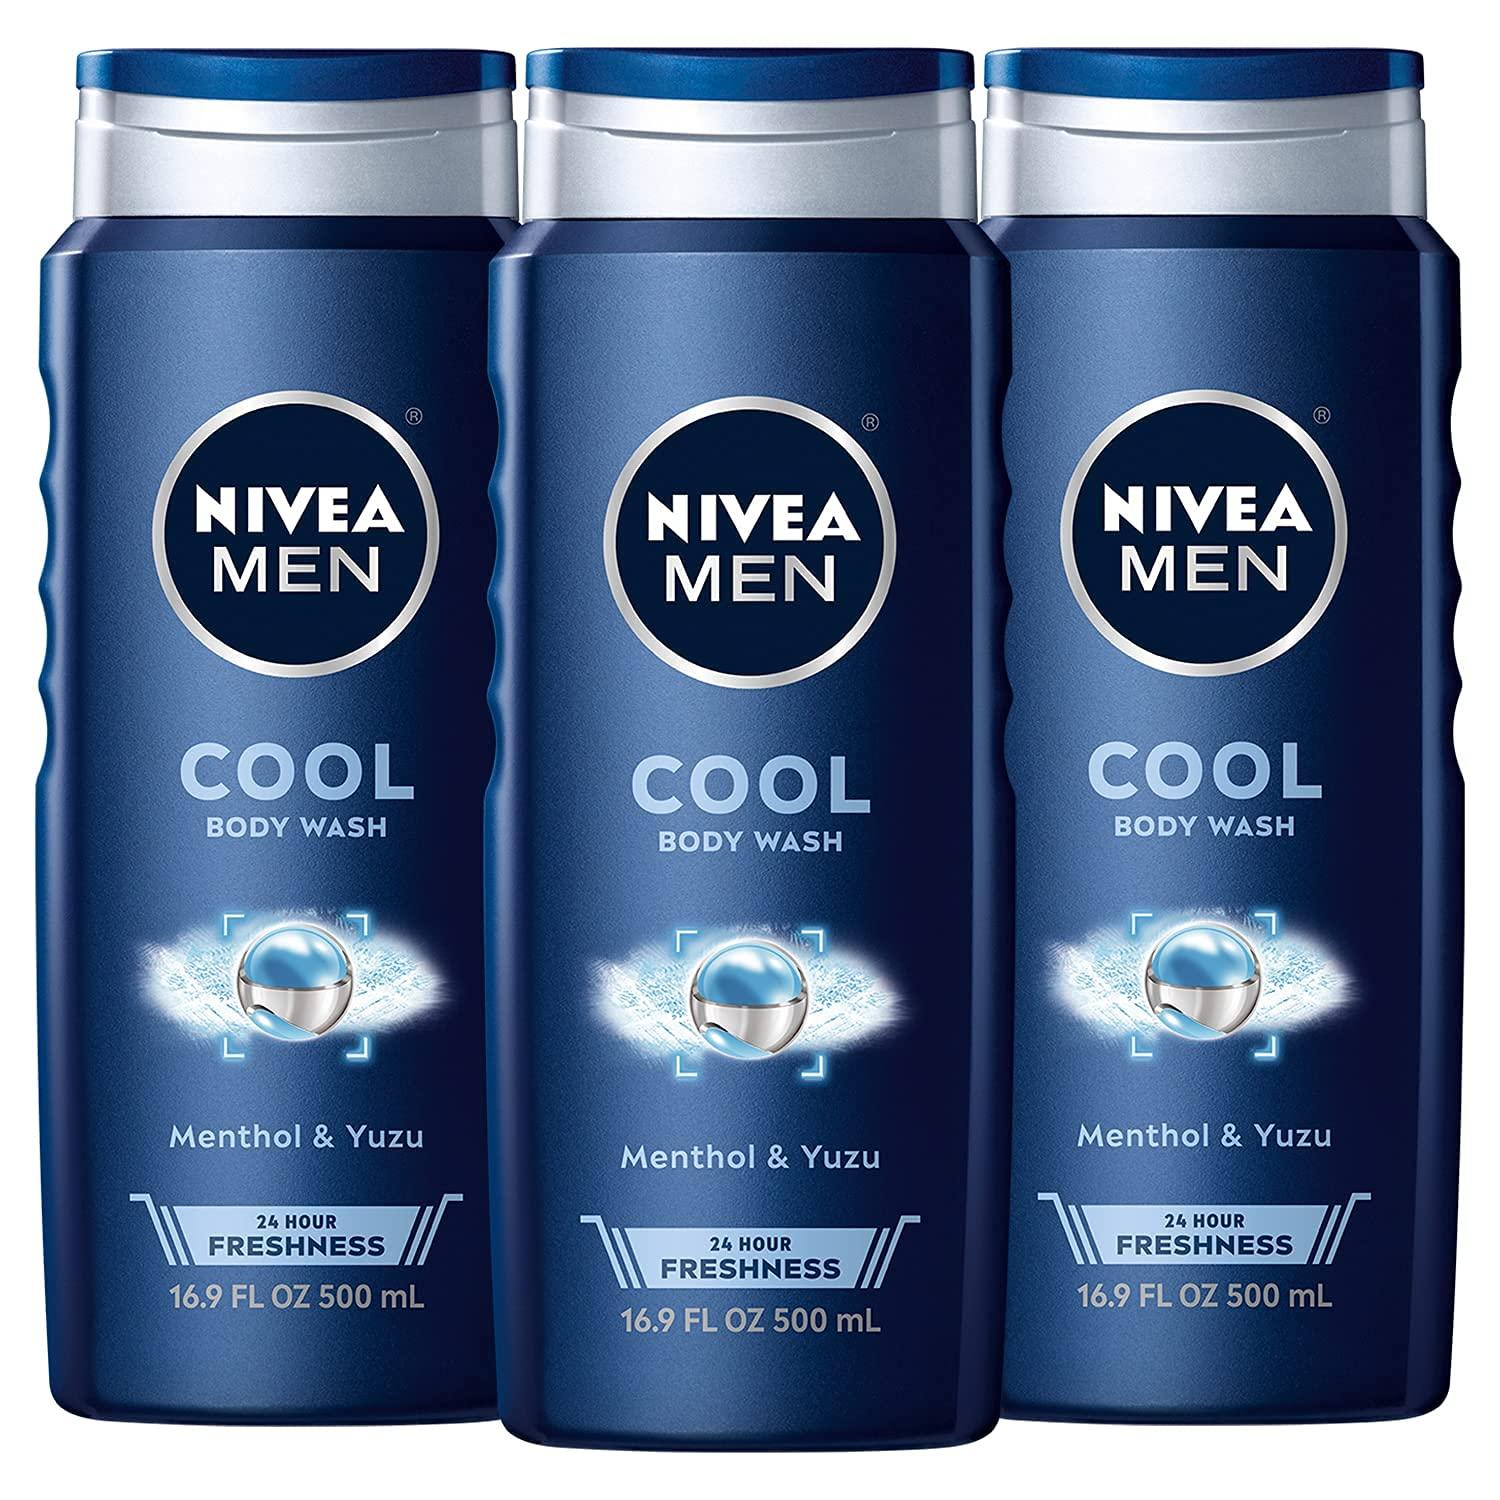 Nivea Men Body Wash Icy Menthol 3-Pack for $9.03 Shipped